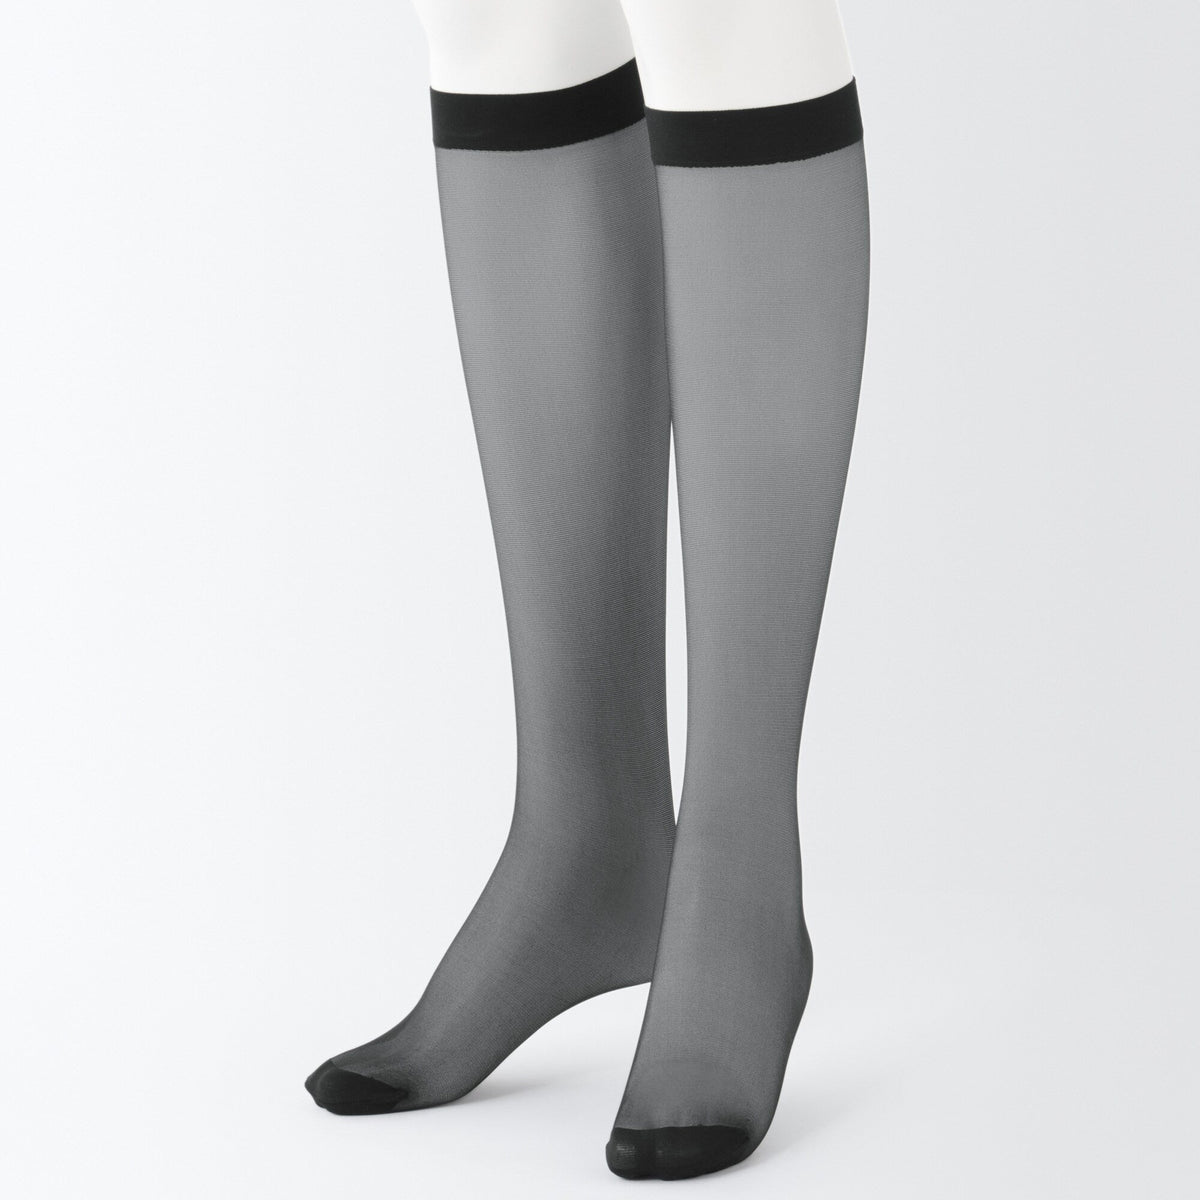 Soft Knee High Stockings 17D, Women's Tights & Stockings